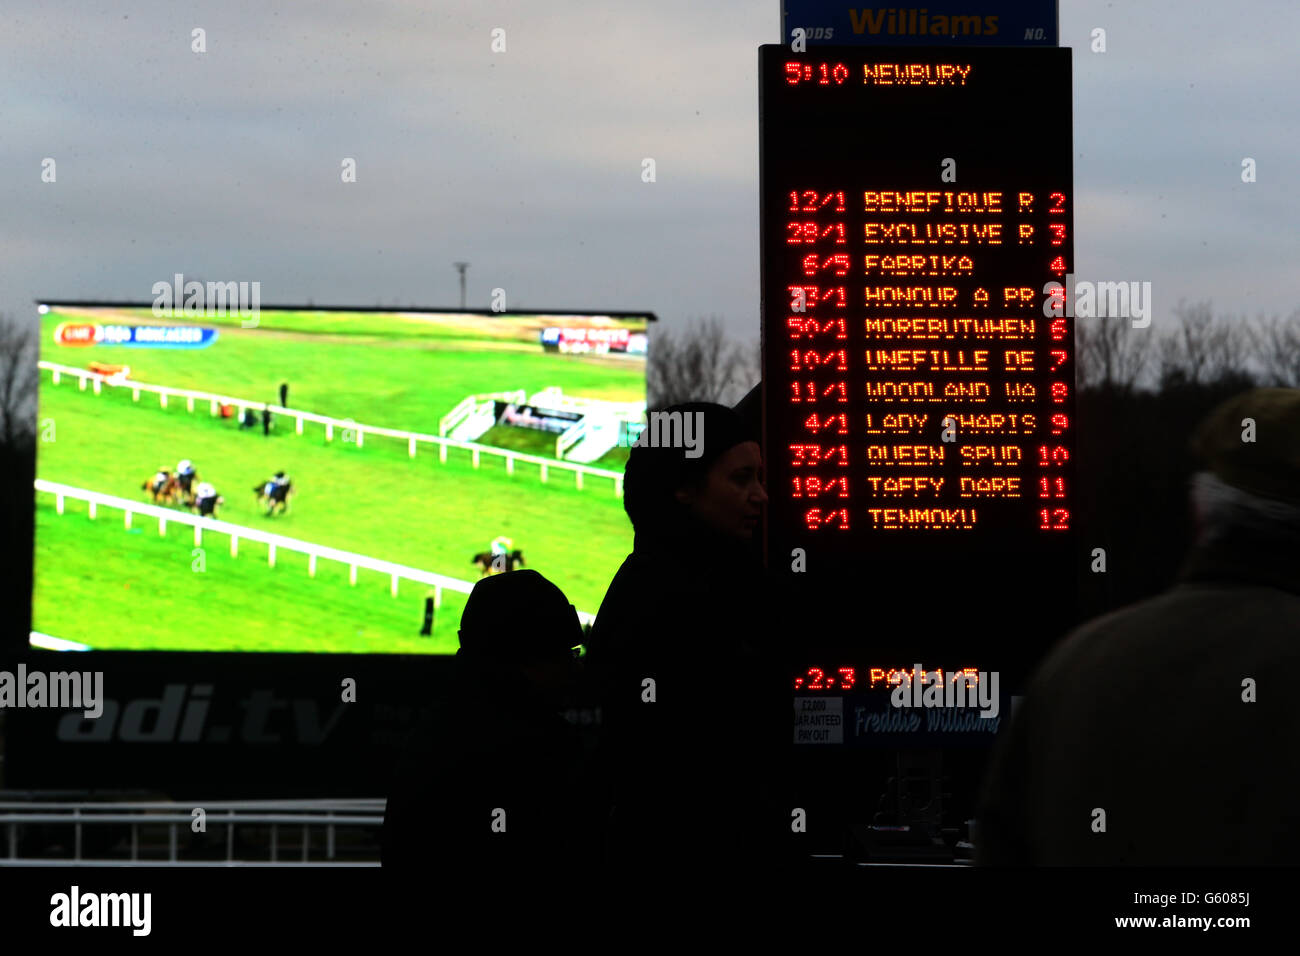 A betting board in front of a giant screen during the Mencap Charity Raceday at Newbury Racecourse, Berkshire. Stock Photo